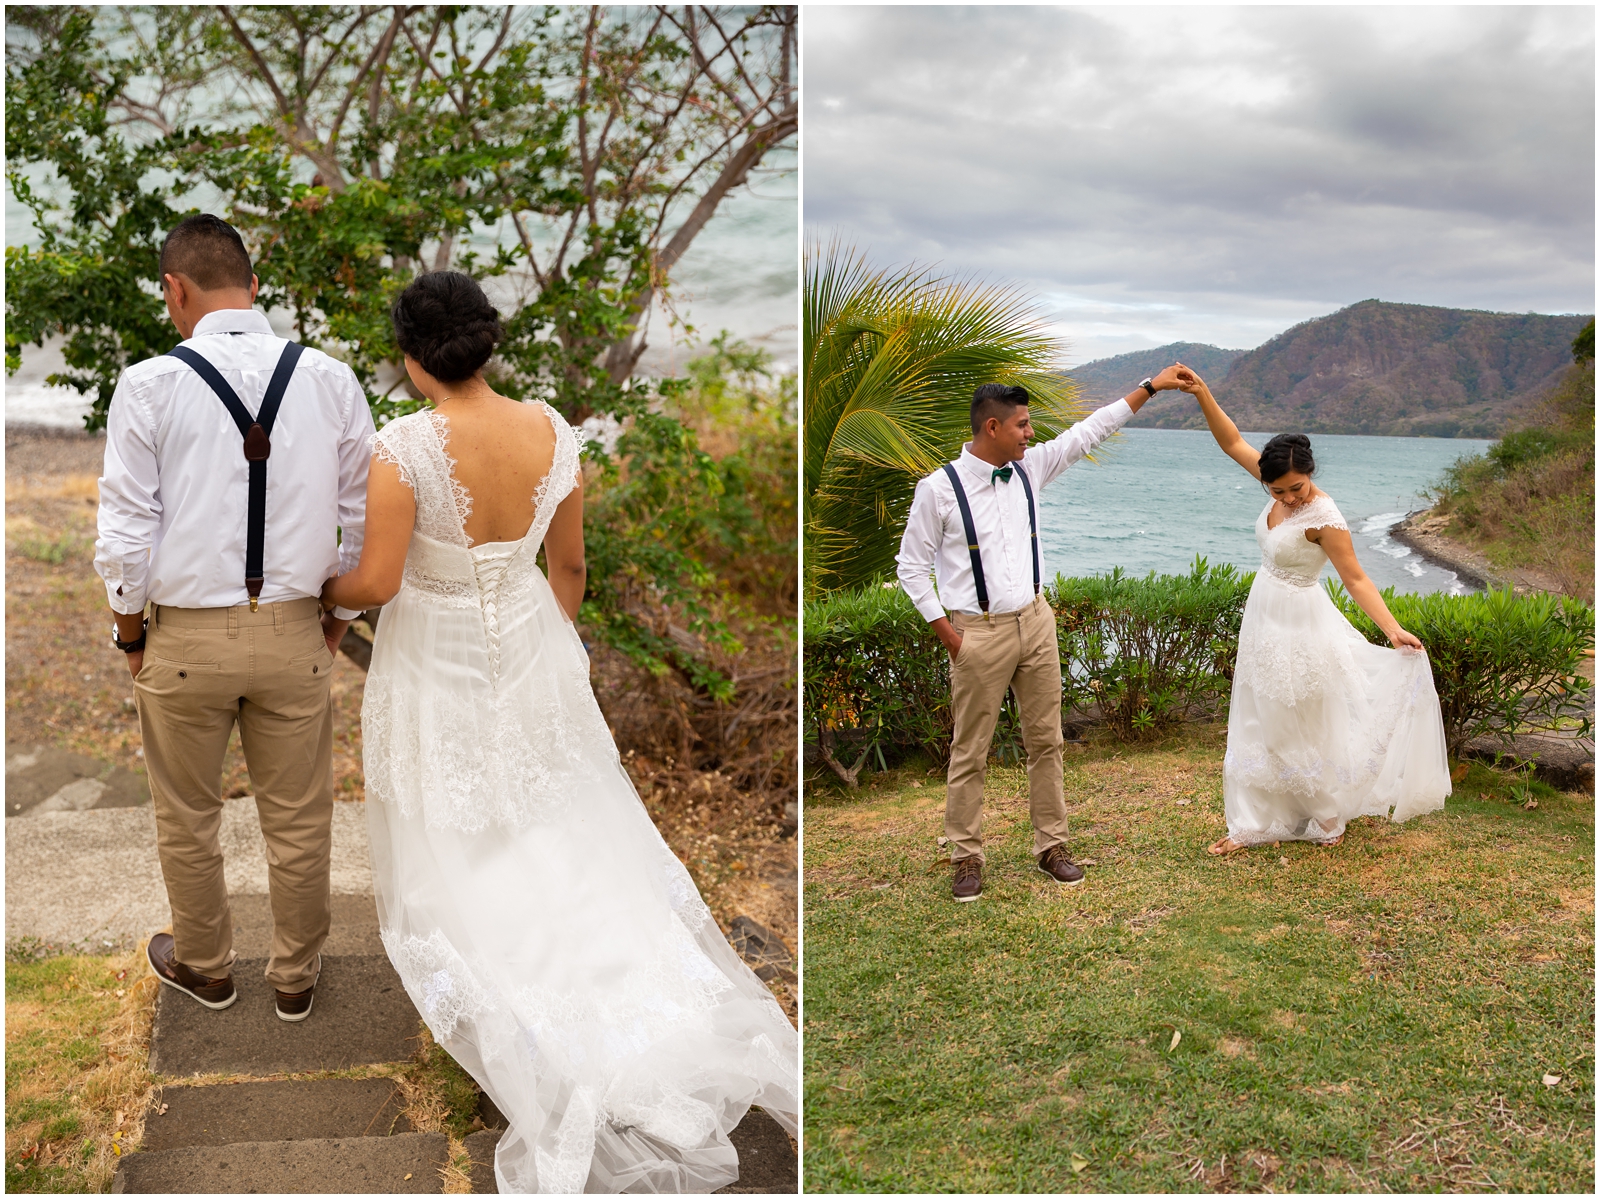 This couple got married on a lagoon in Nicaragua.